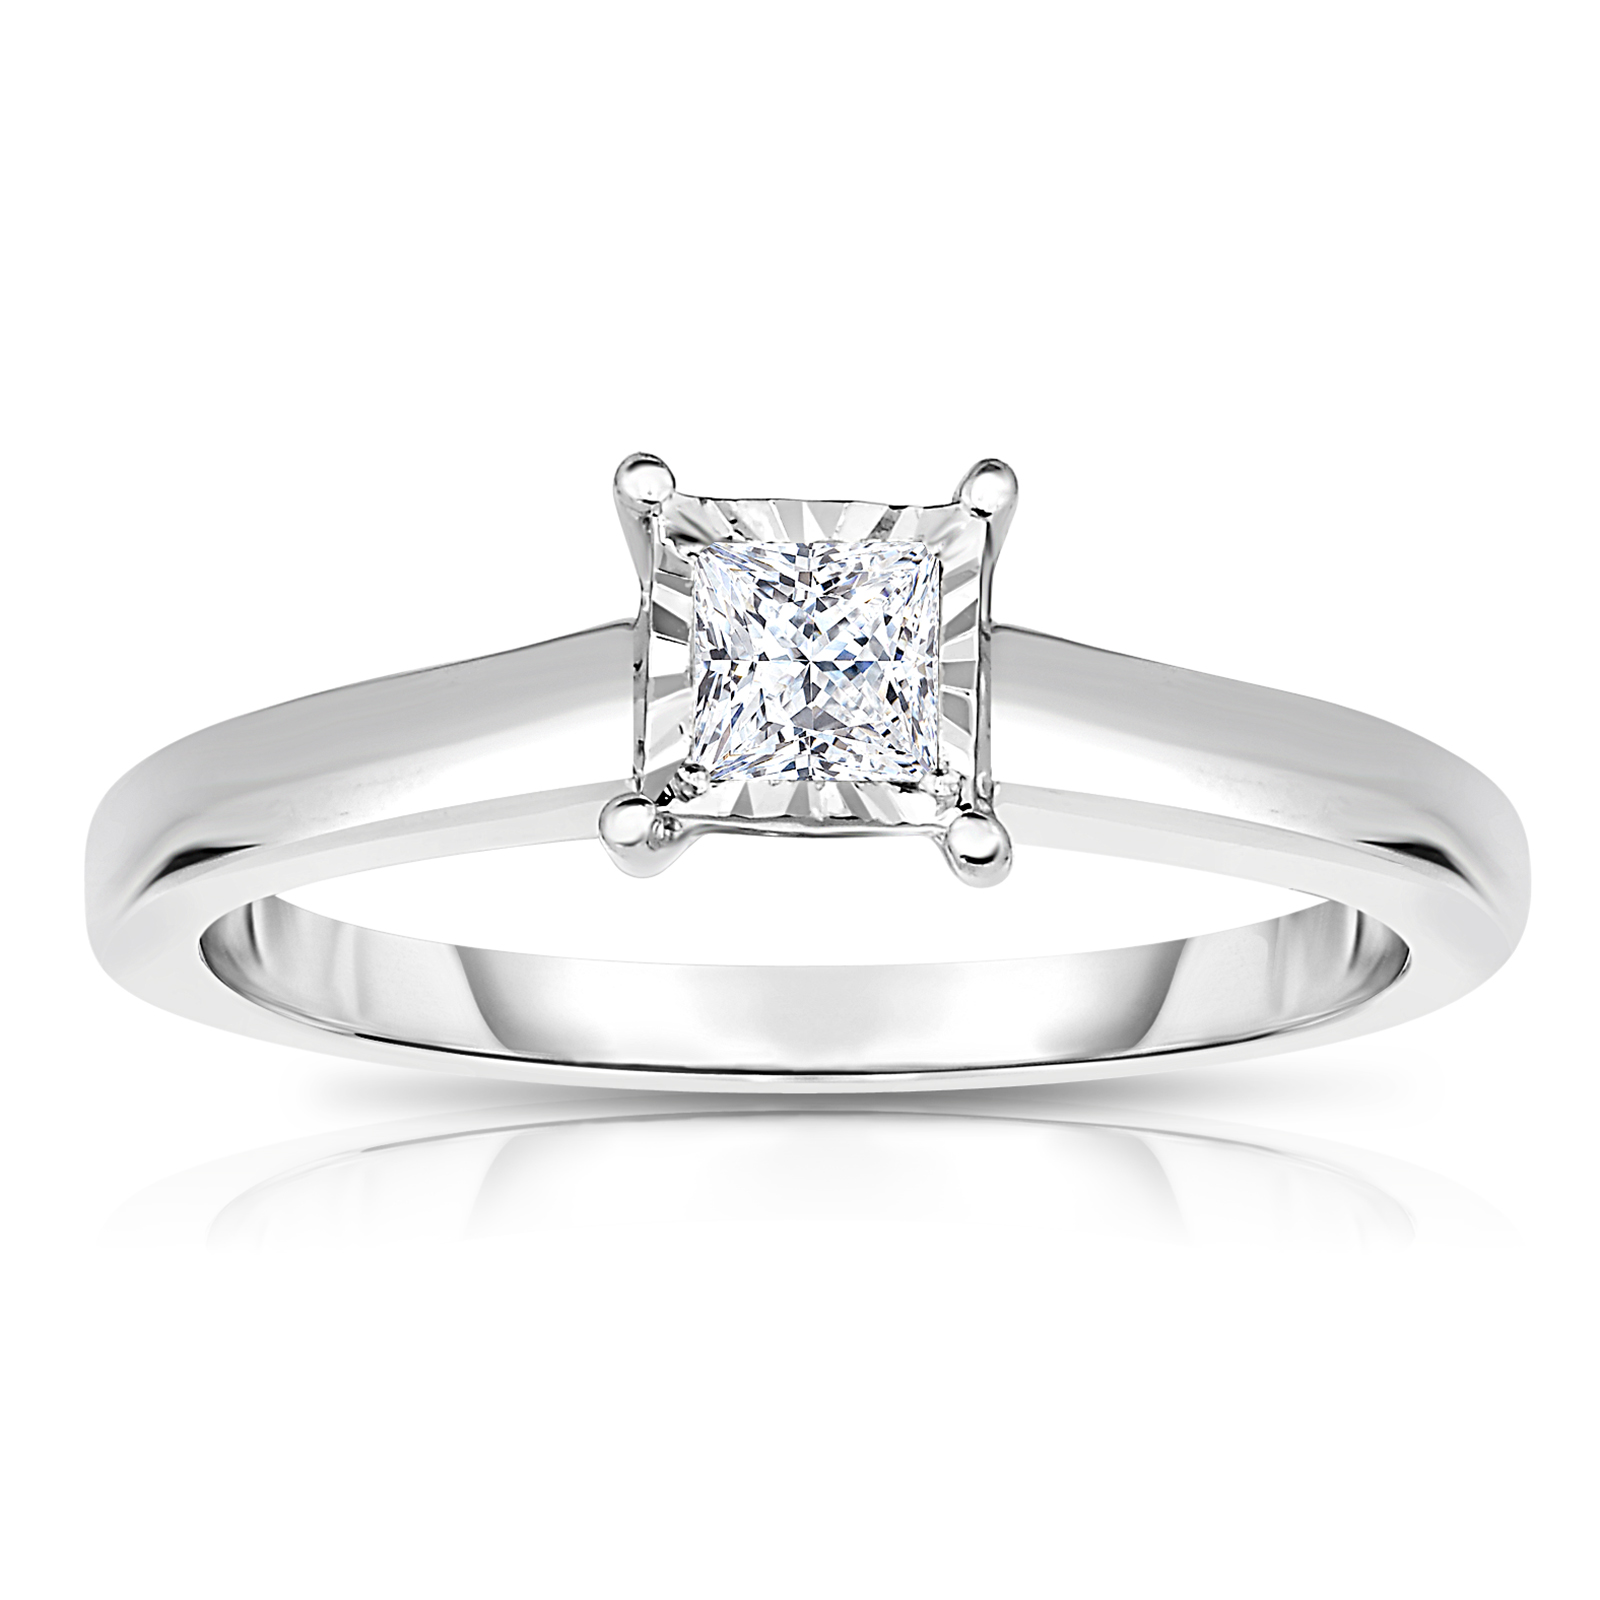 Tru Miracle 0.2 CTTW Princess Diamond Solitaire 10K Ring - Size 7 Only